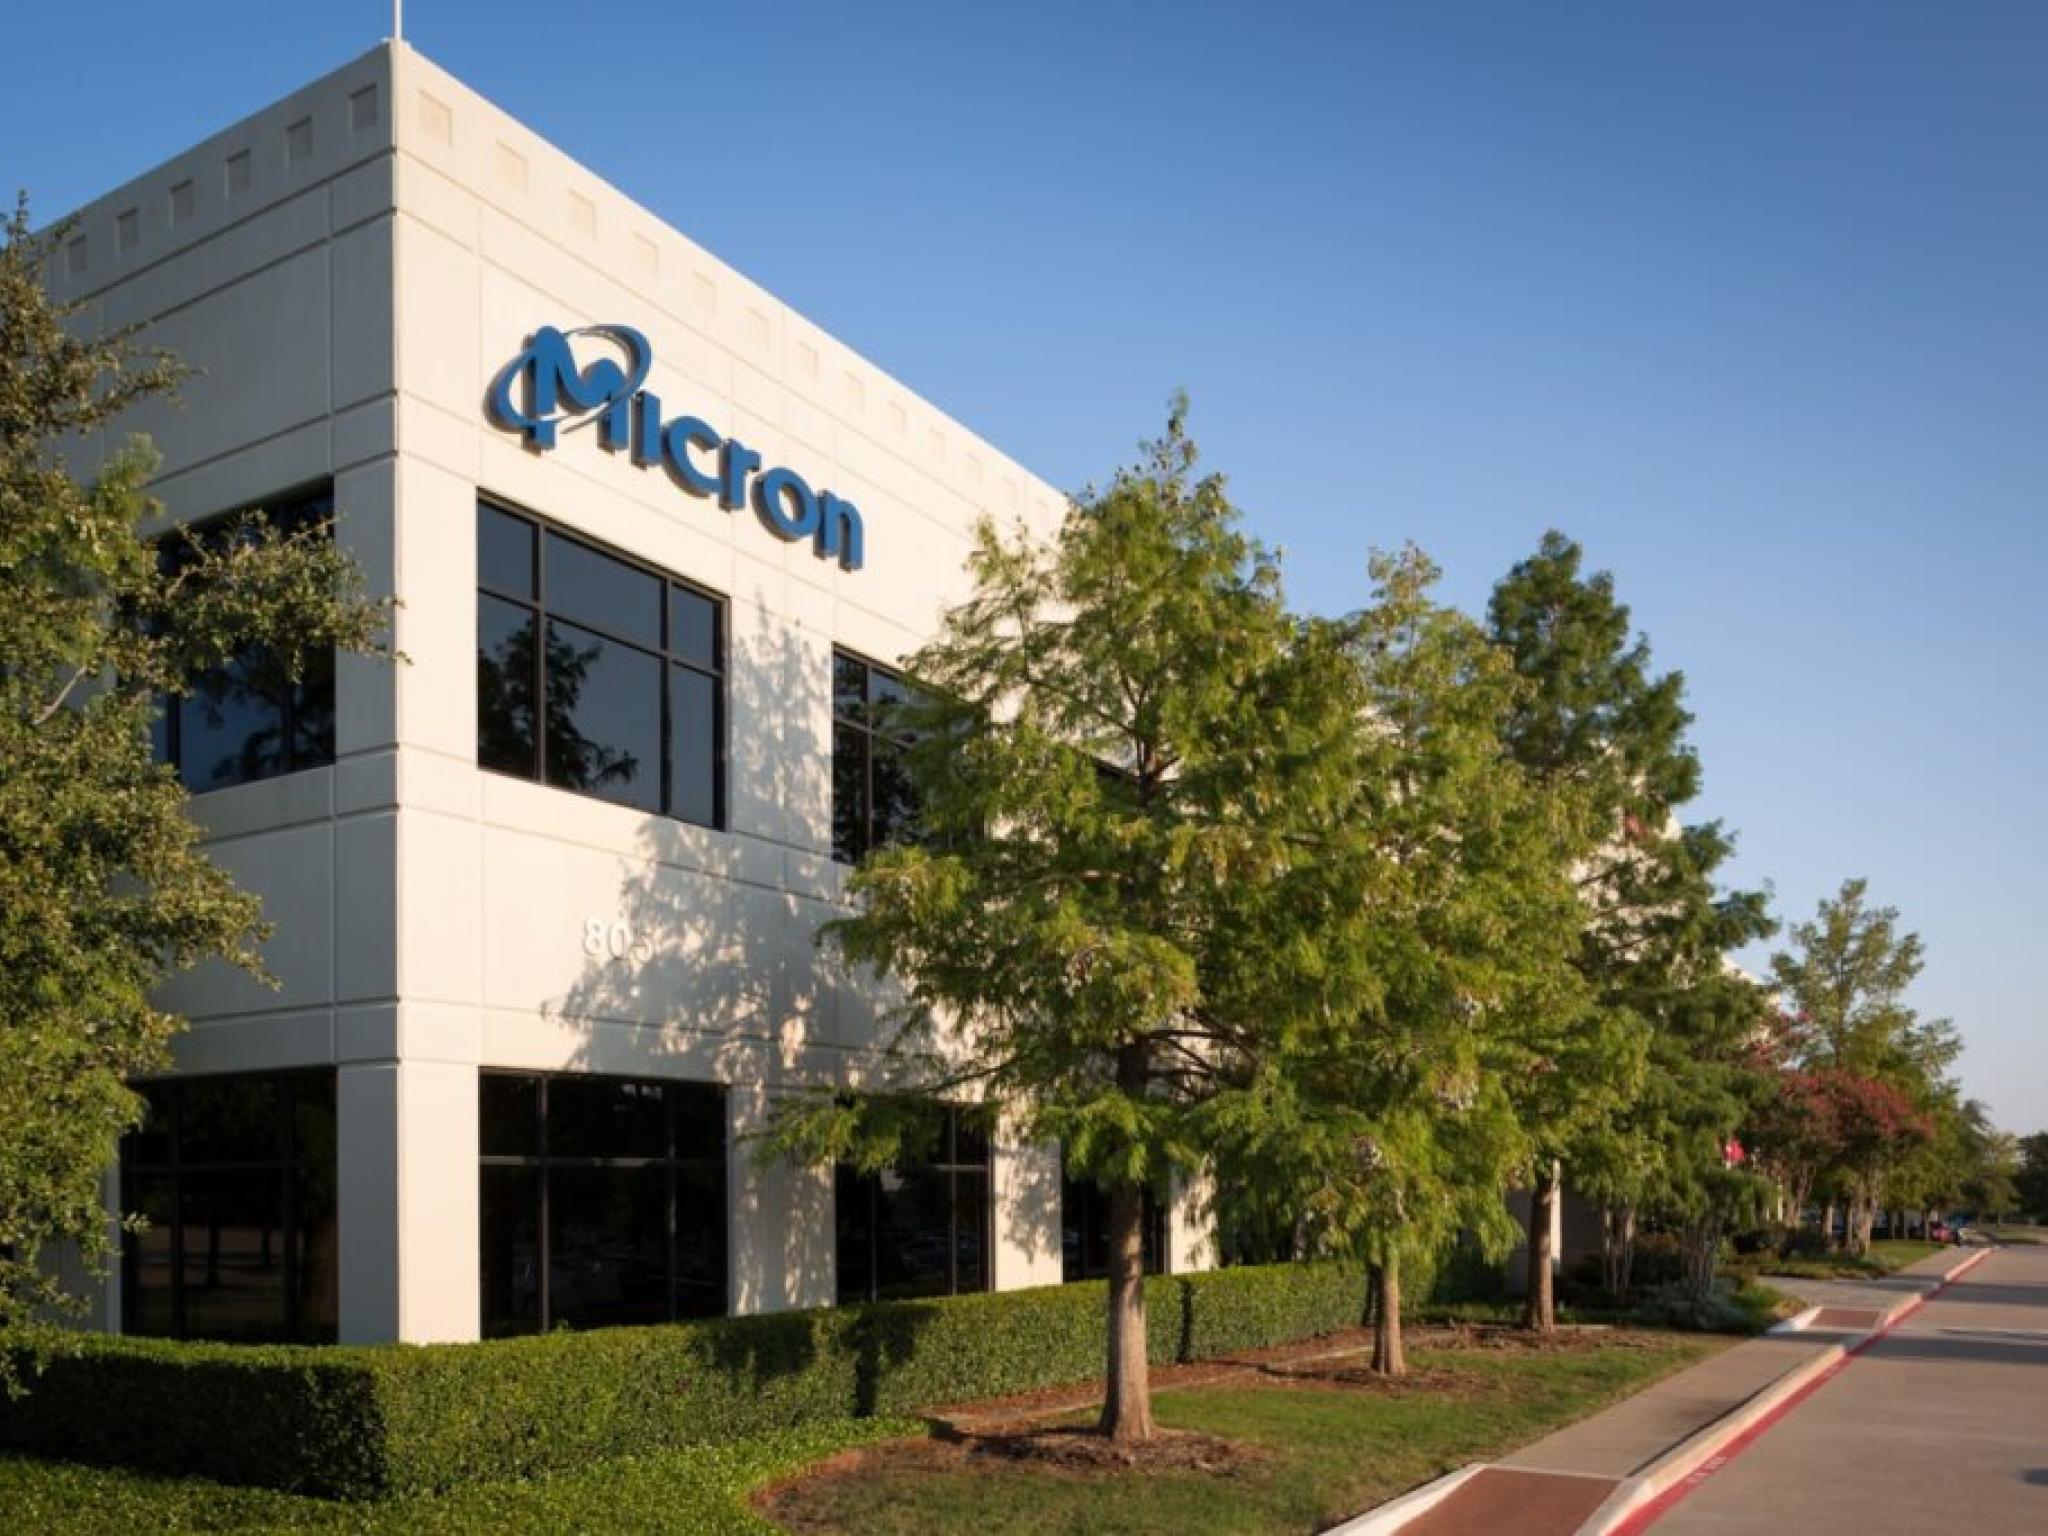  this-micron-technology-analyst-is-no-longer-bearish-here-are-top-5-upgrades-for-today 